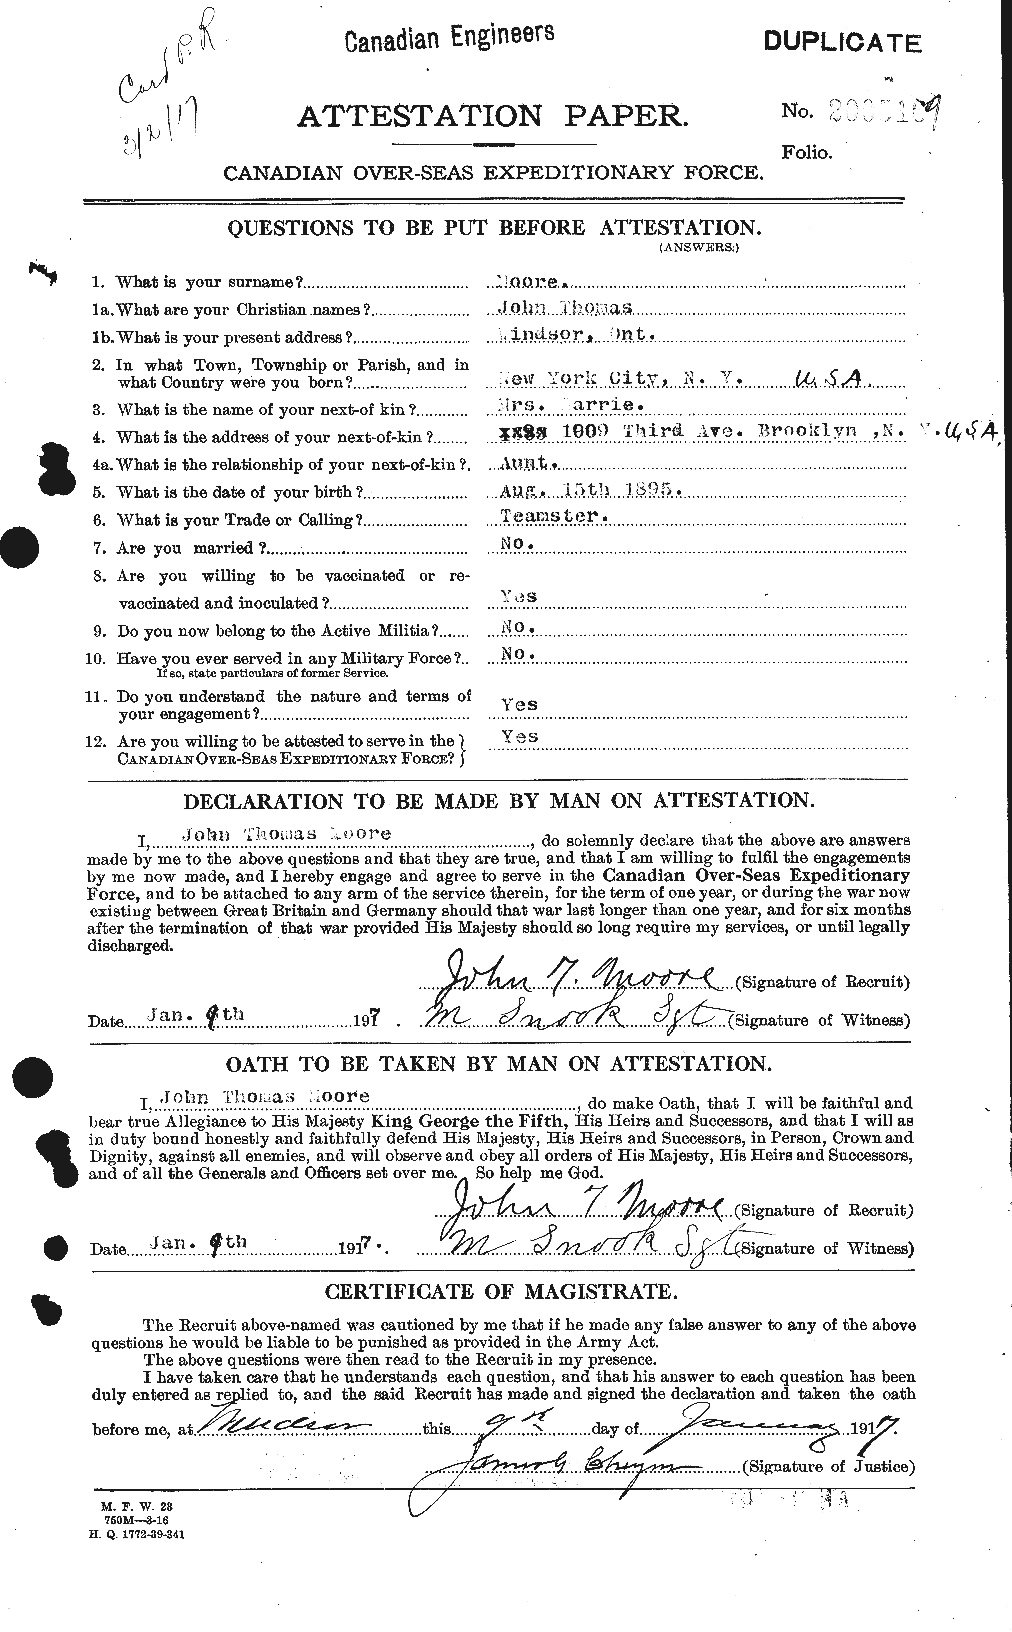 Personnel Records of the First World War - CEF 503338a